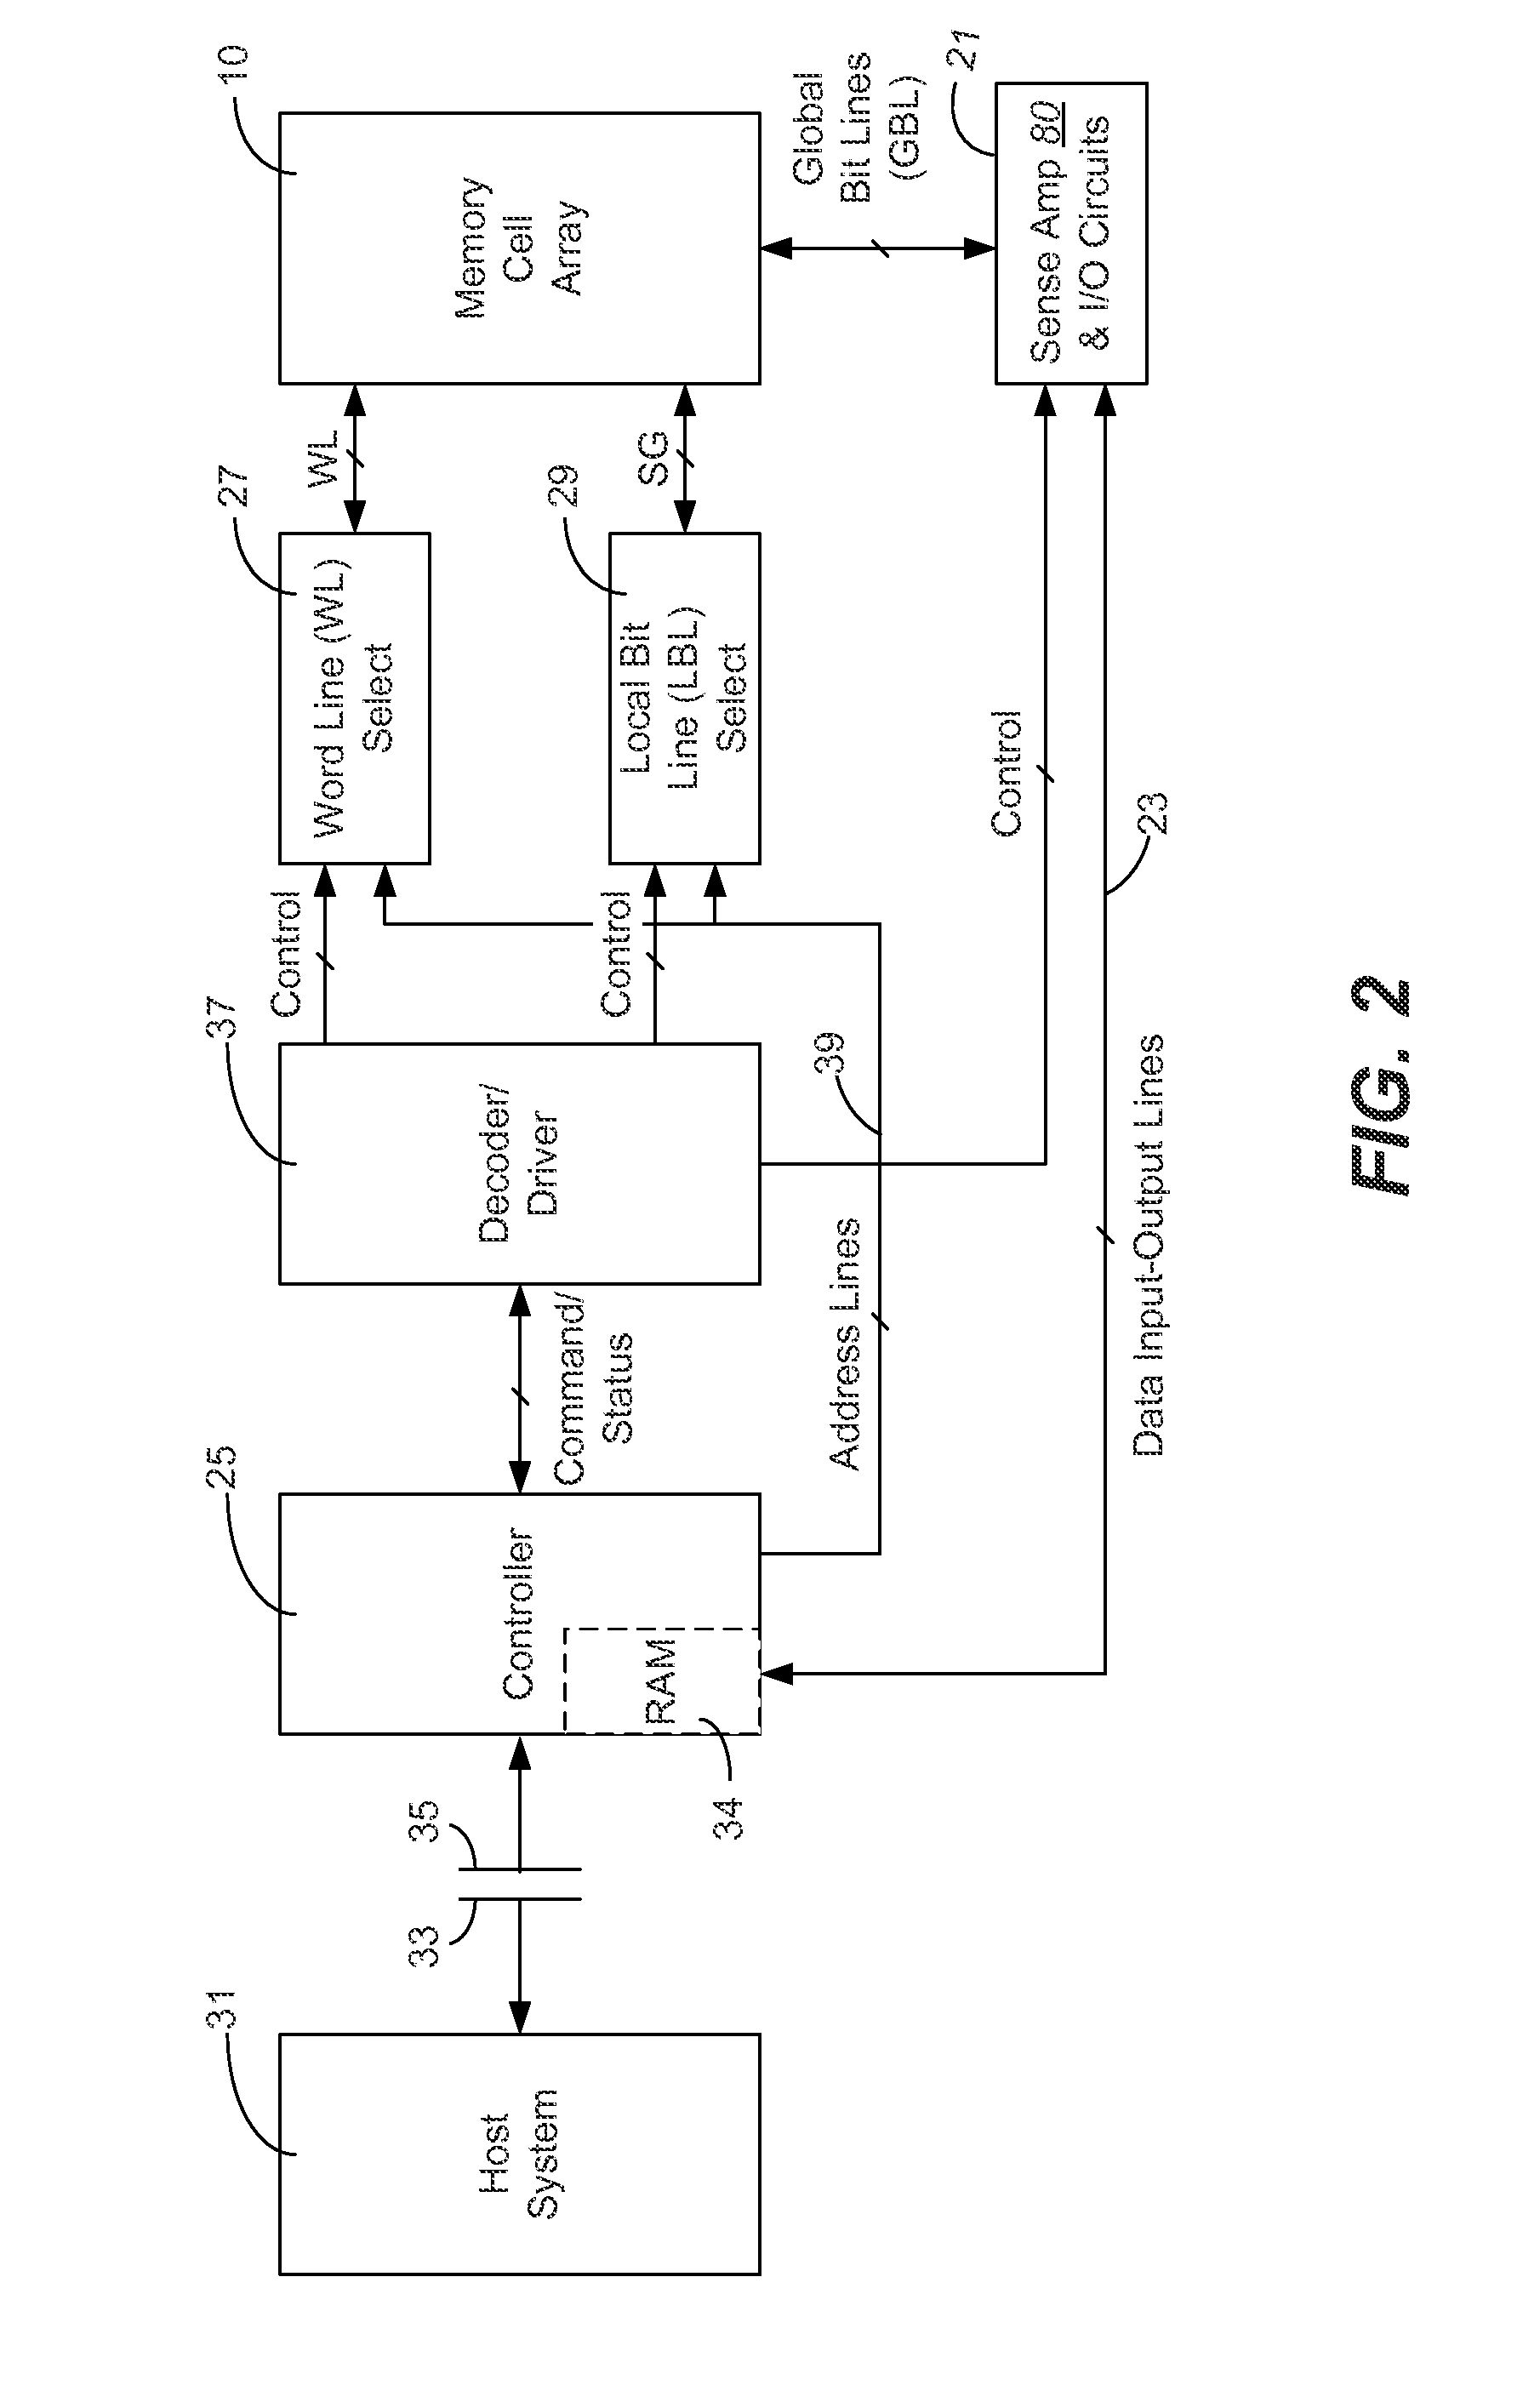 Differential current sense amplifier and method for non-volatile memory